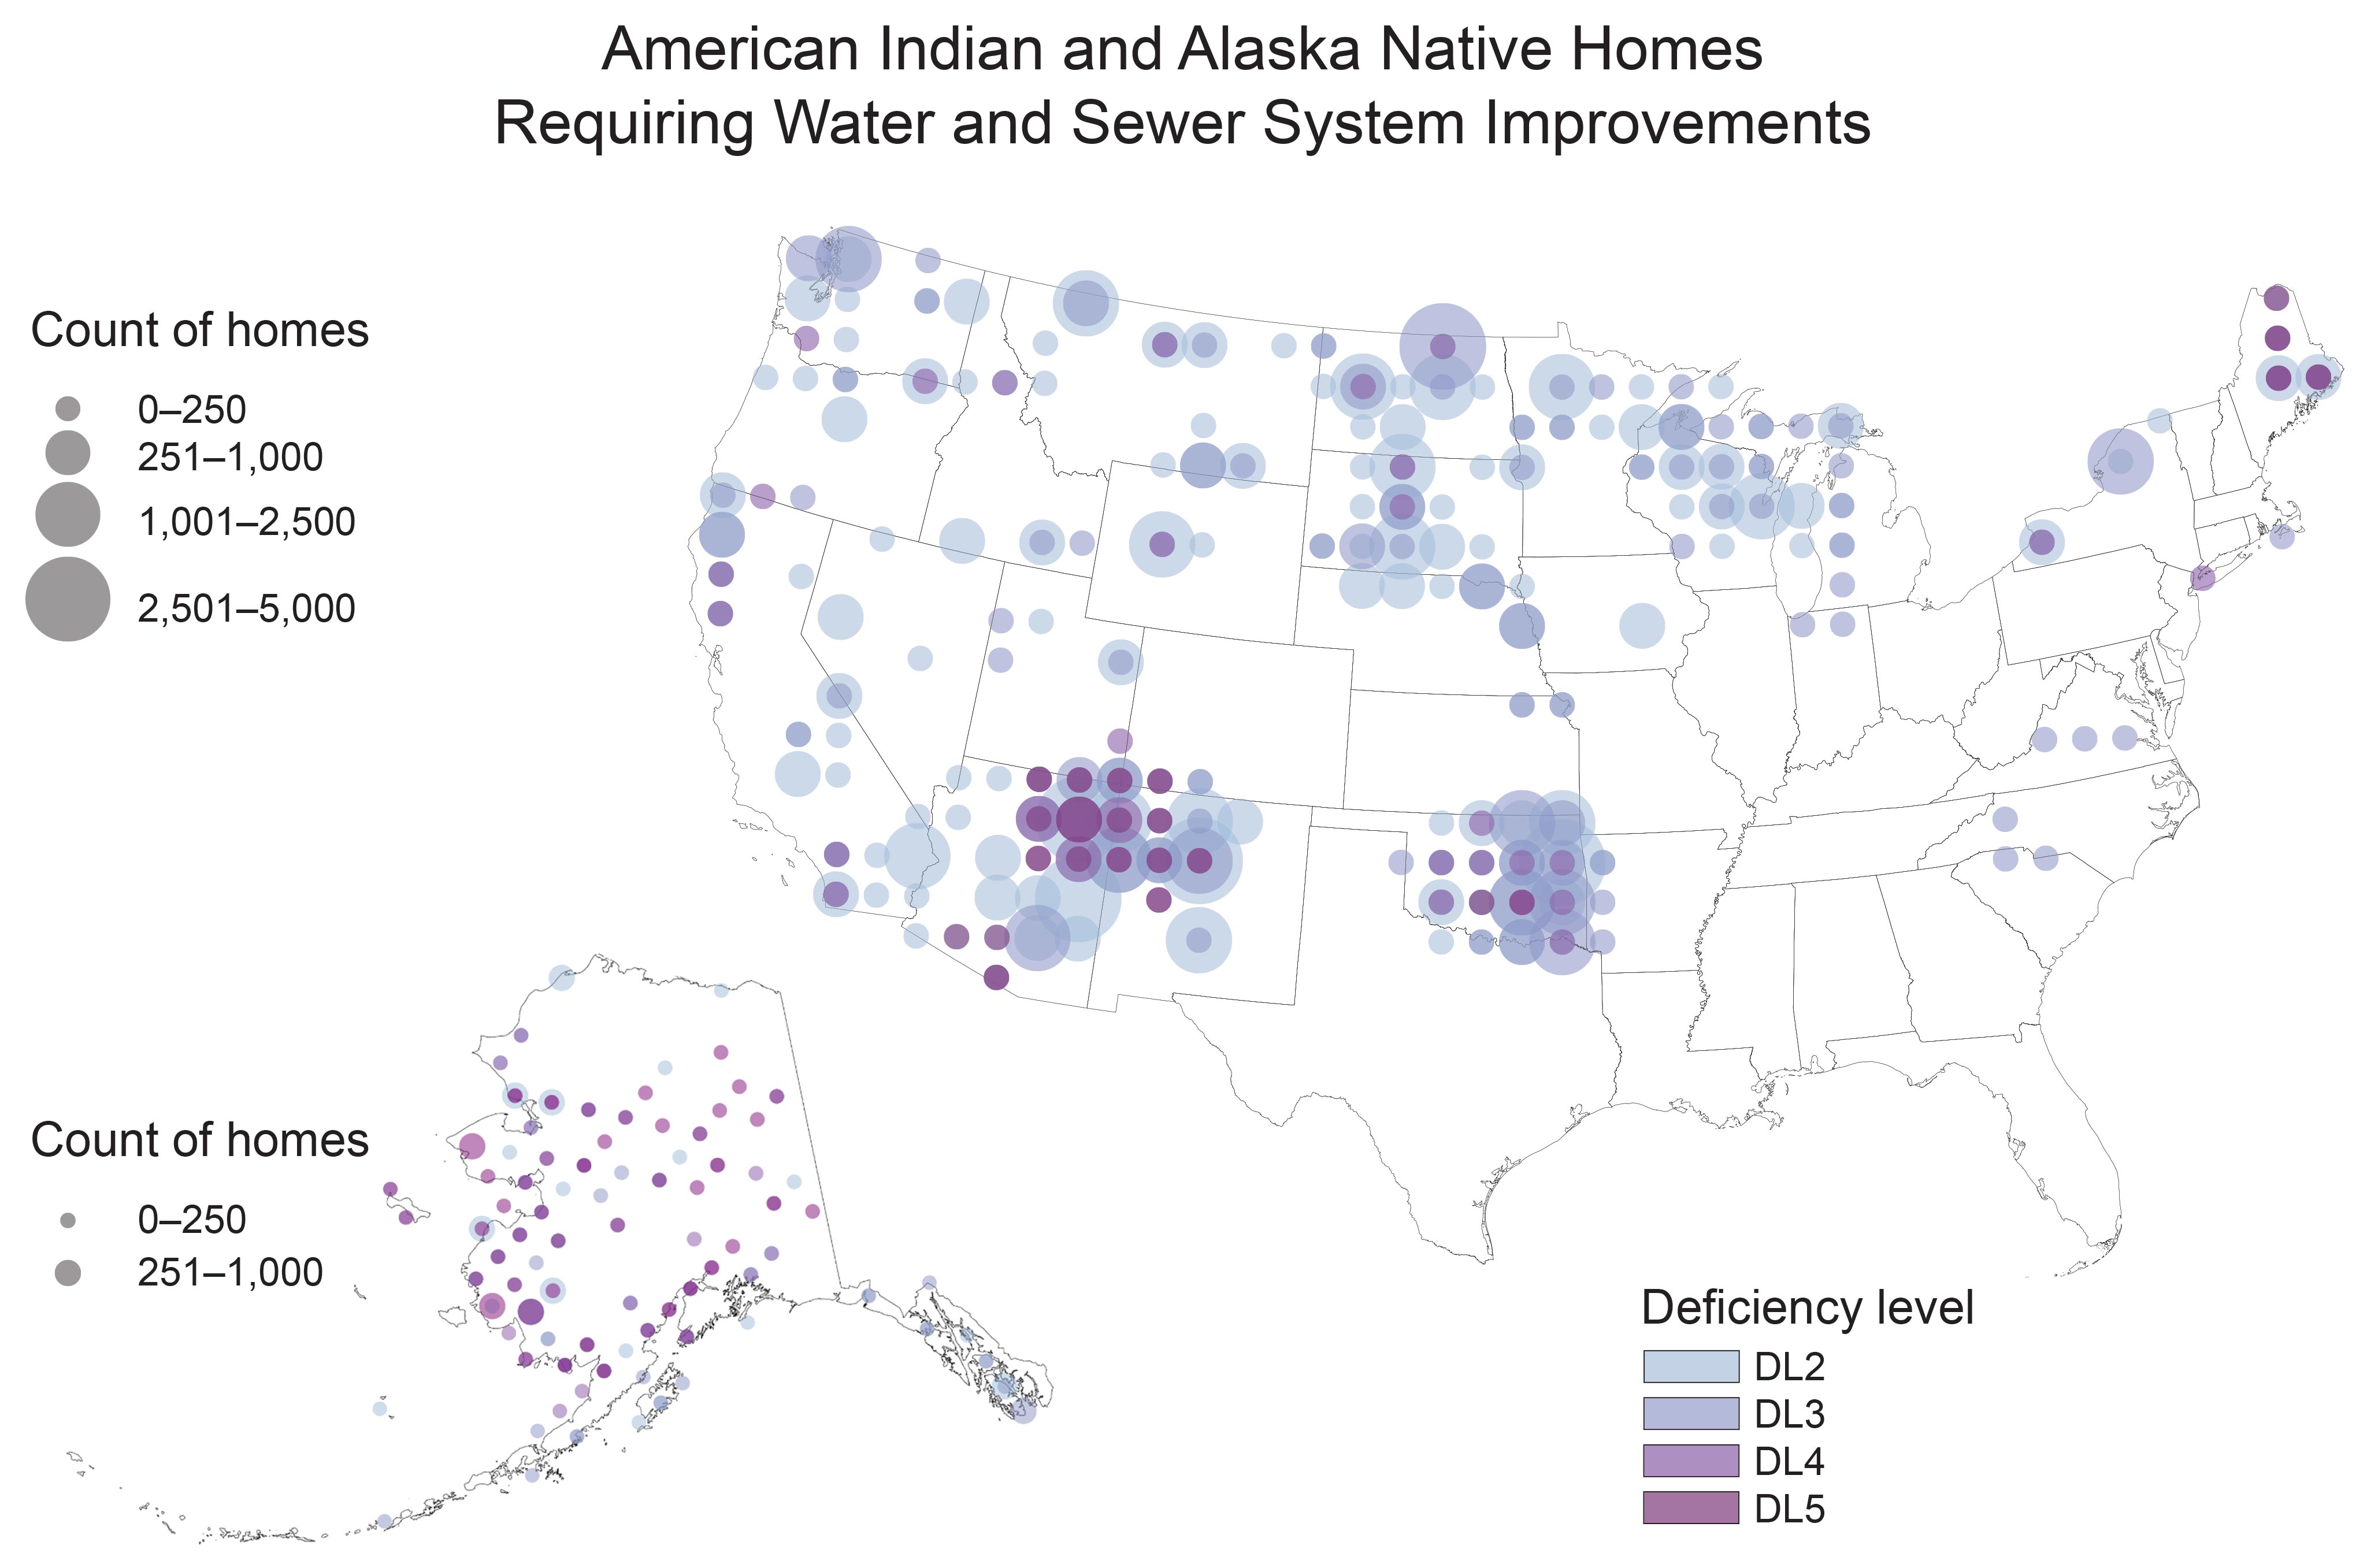 American Indian/Alaska Native Homes Requiring Water and Sewer System Improvements